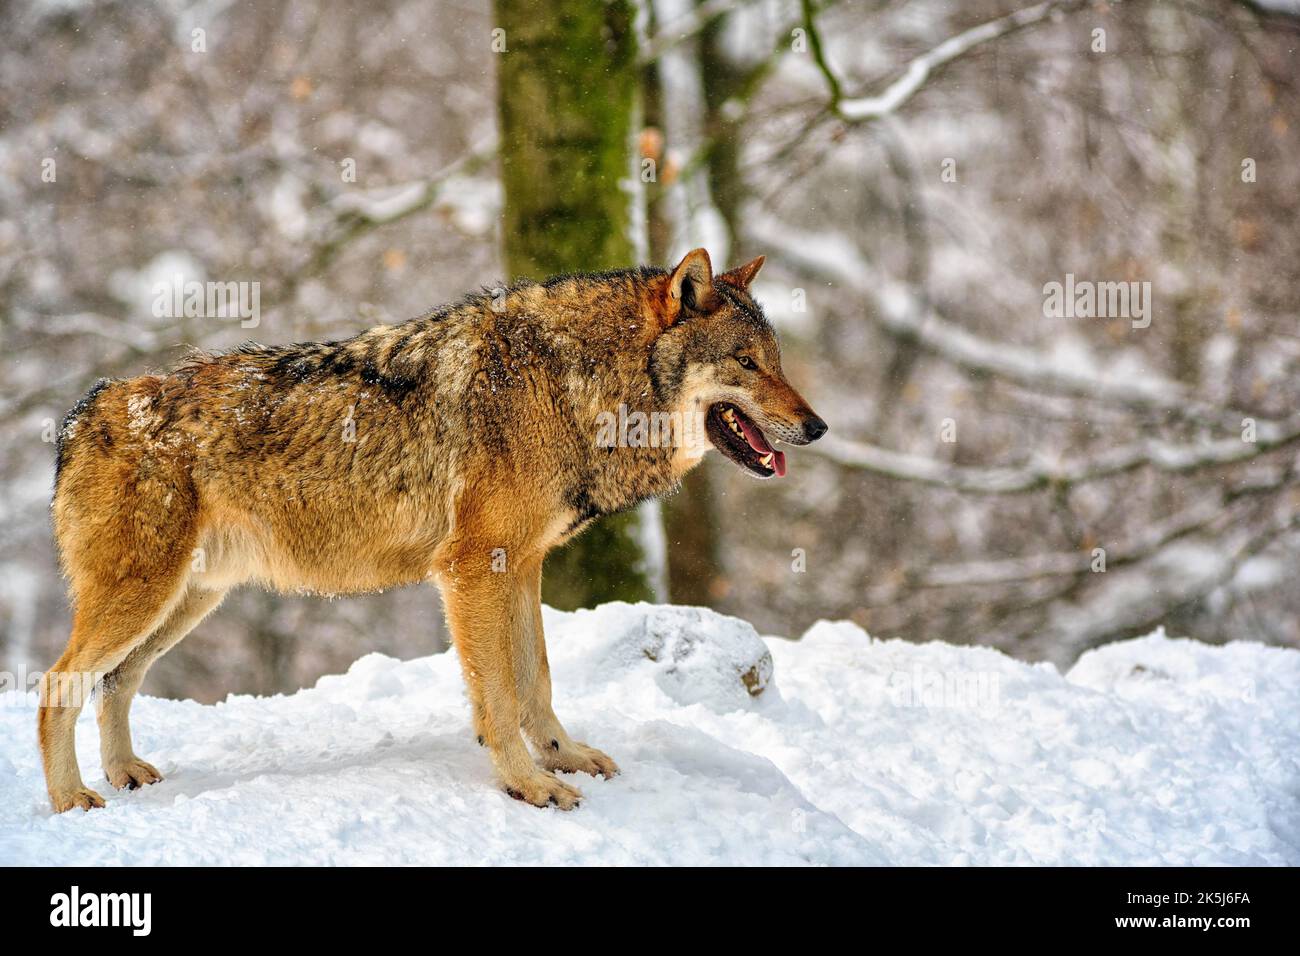 Gray wolf (Canis lupus) in the snow, in the game reserve, Neuhaus Wildlife Park in winter, Neuhaus im Solling, Solling-Vogler nature park Park, Lower Stock Photo